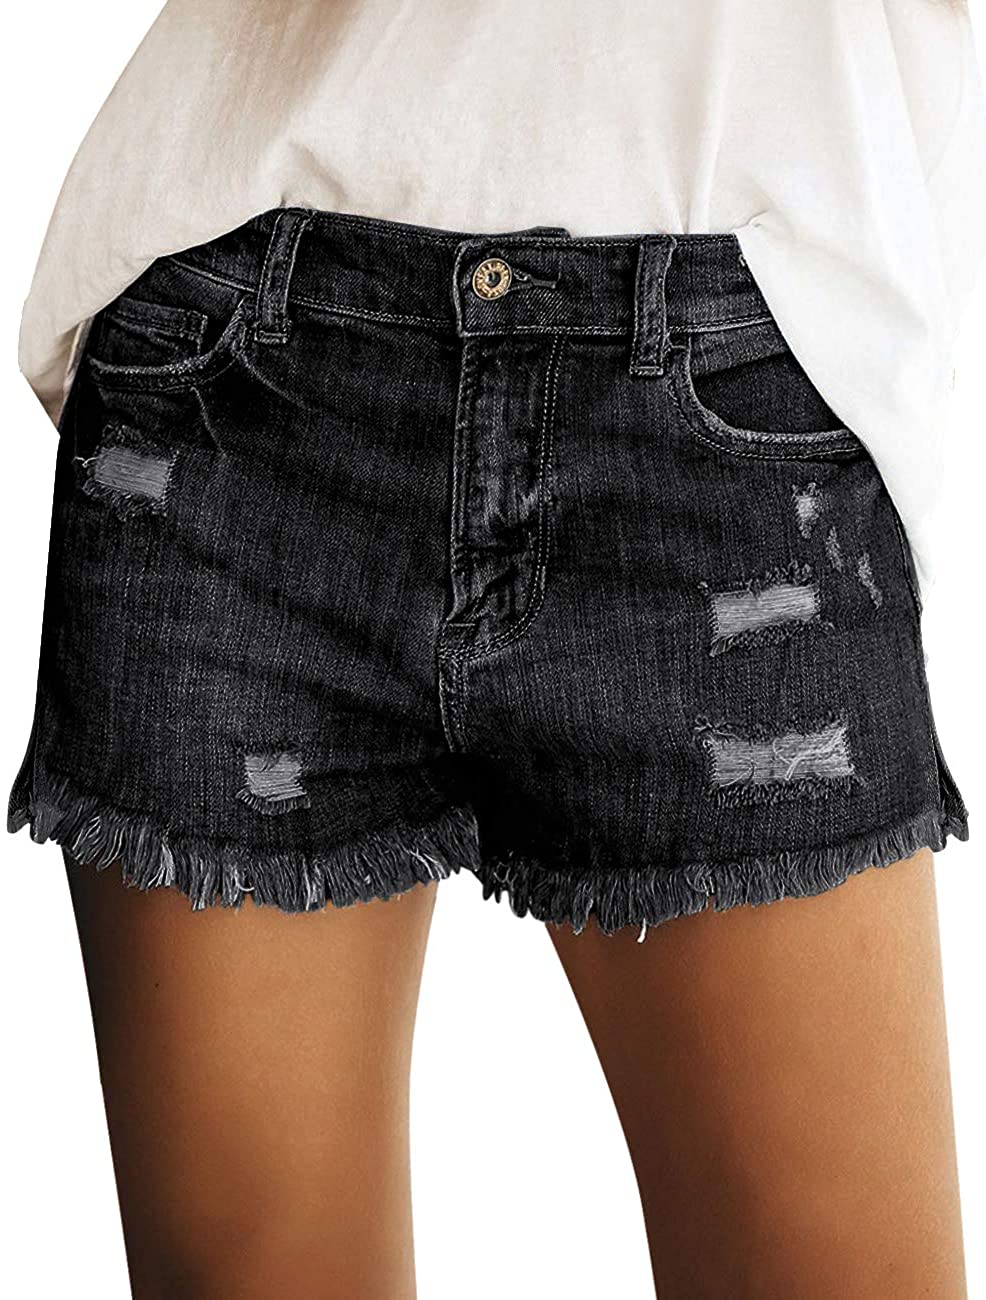 Wholesale Best Sex Mini Shorts for Single's Day Sales 2020 from DHgate